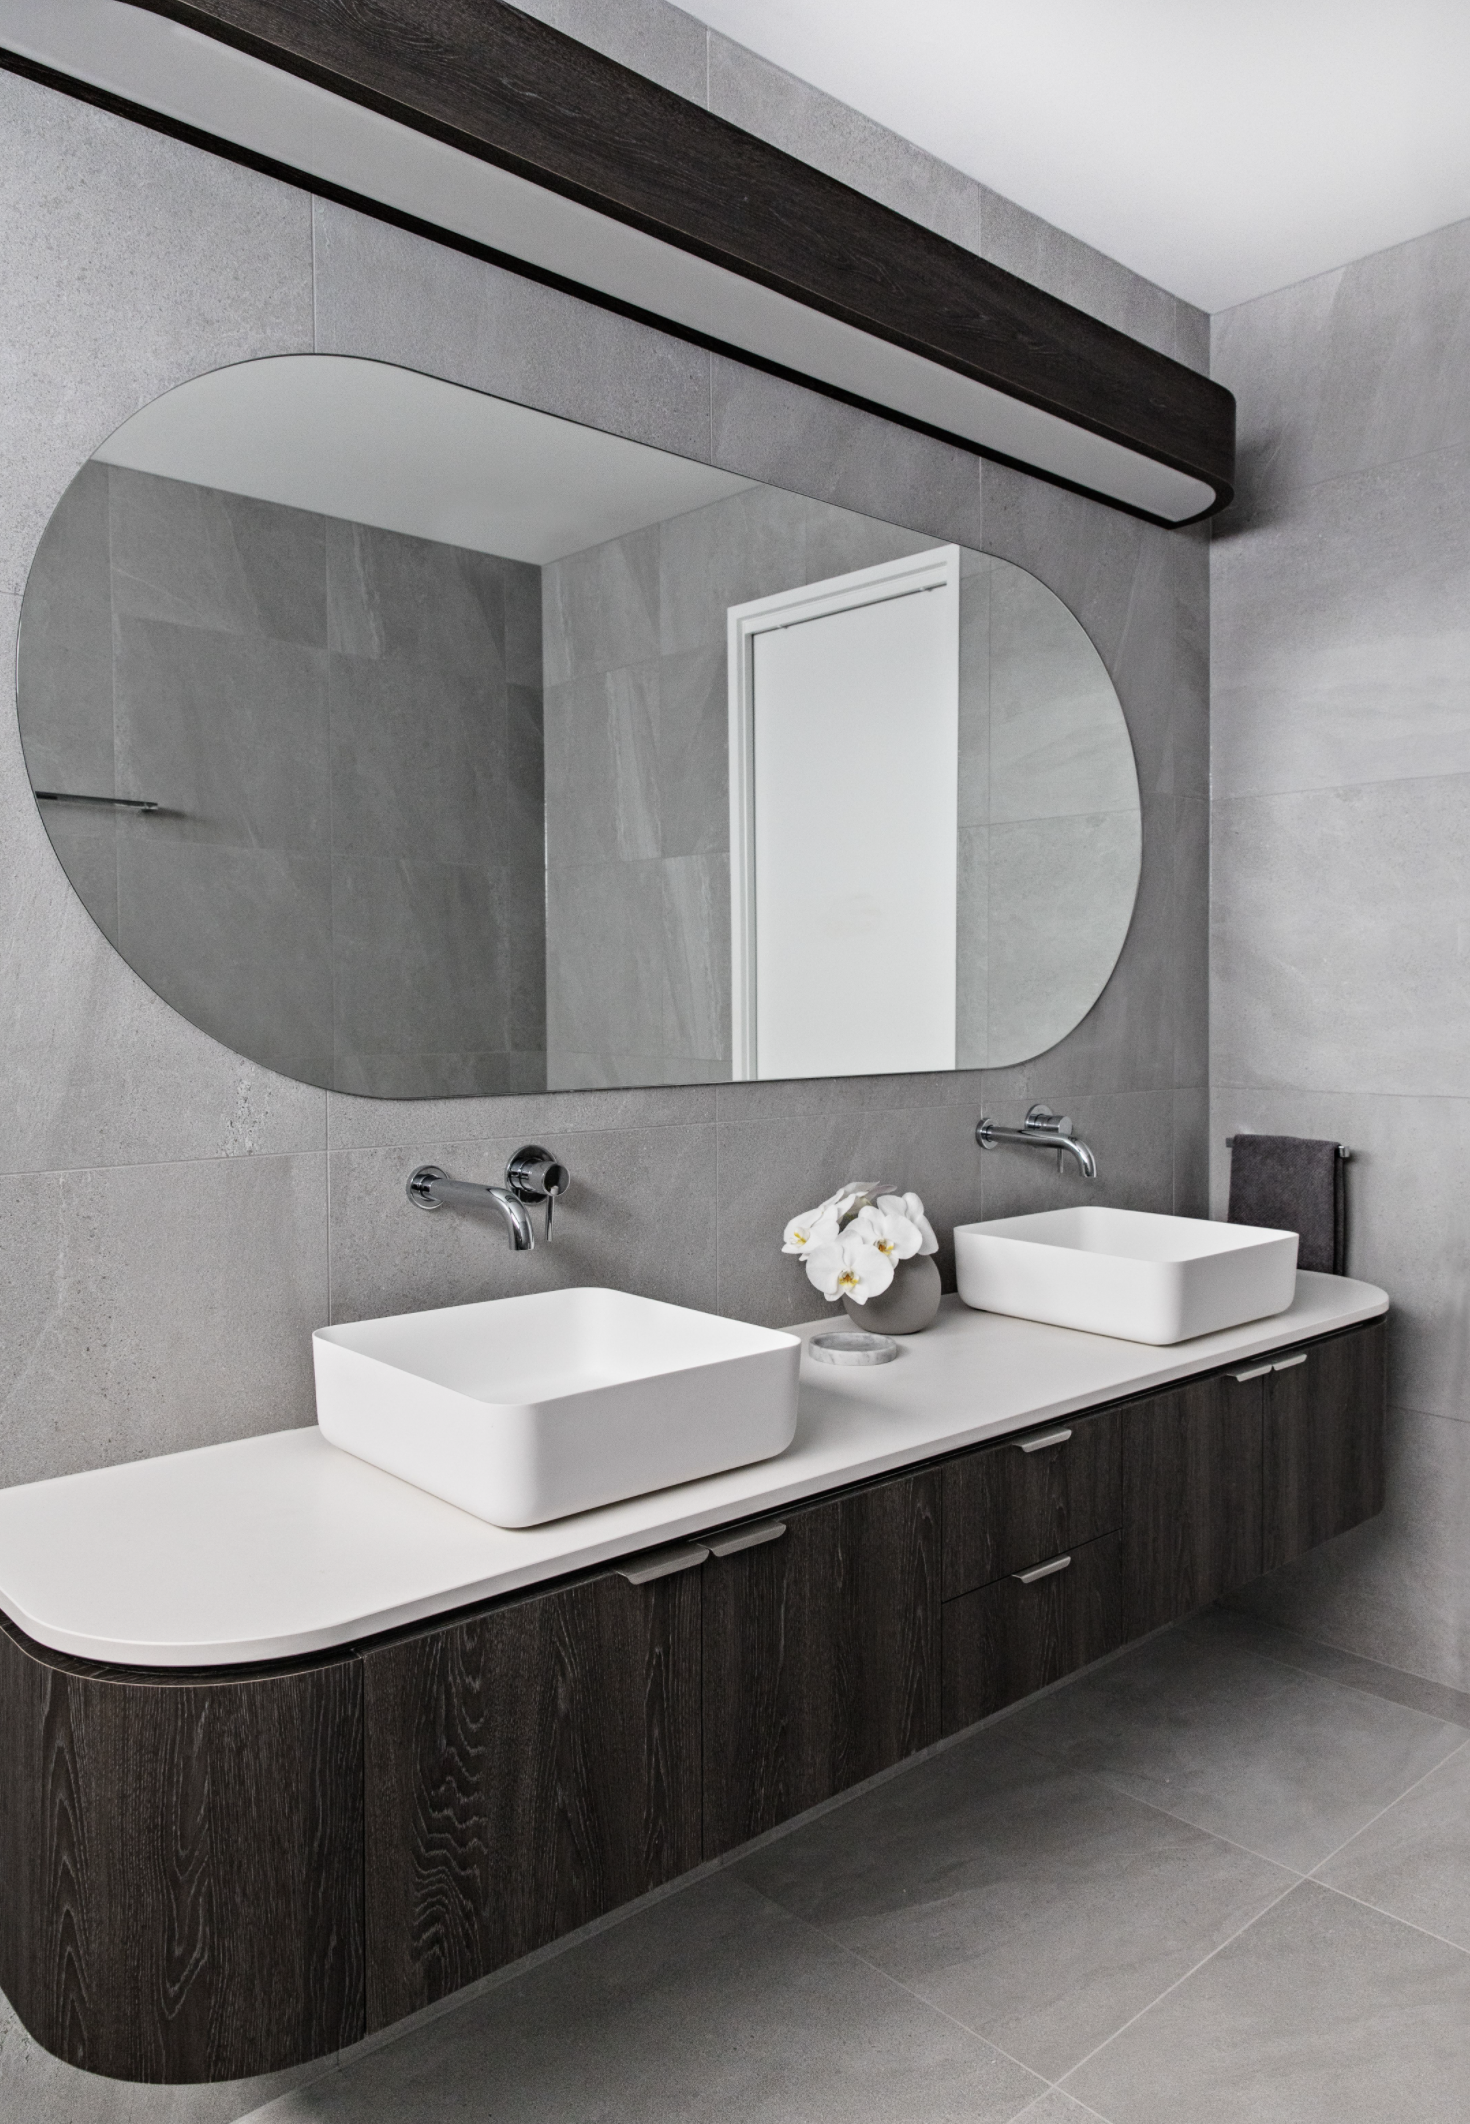 Curved Vanity And Wall Light Design, Curved Bathroom Vanity Light